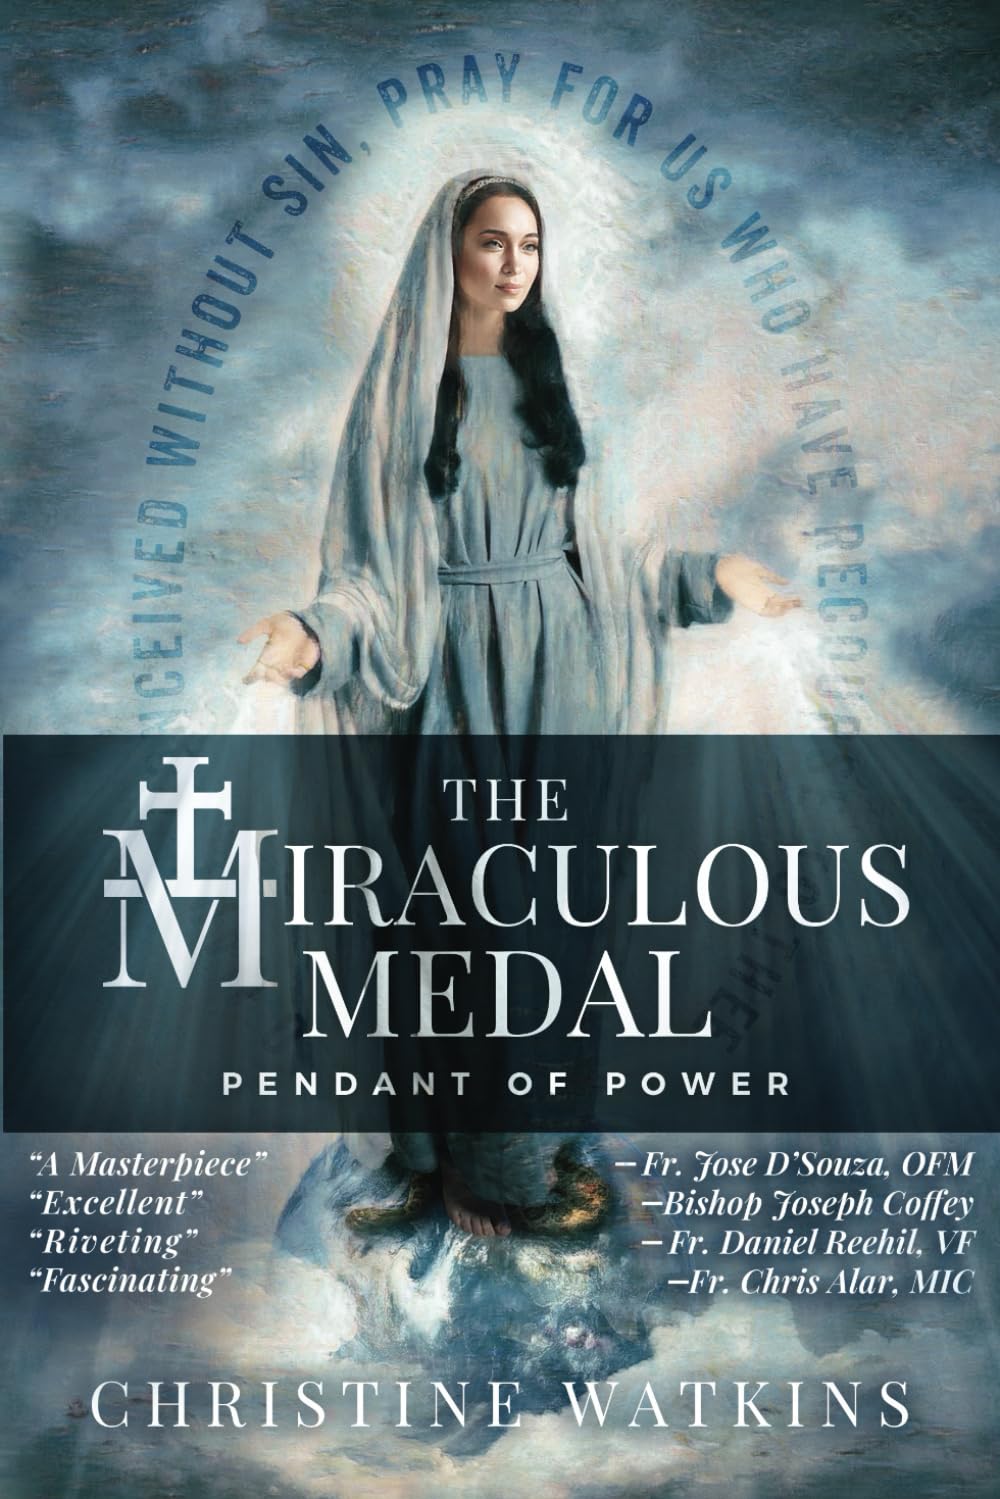 The Miraculous Medal: Pendant of Power